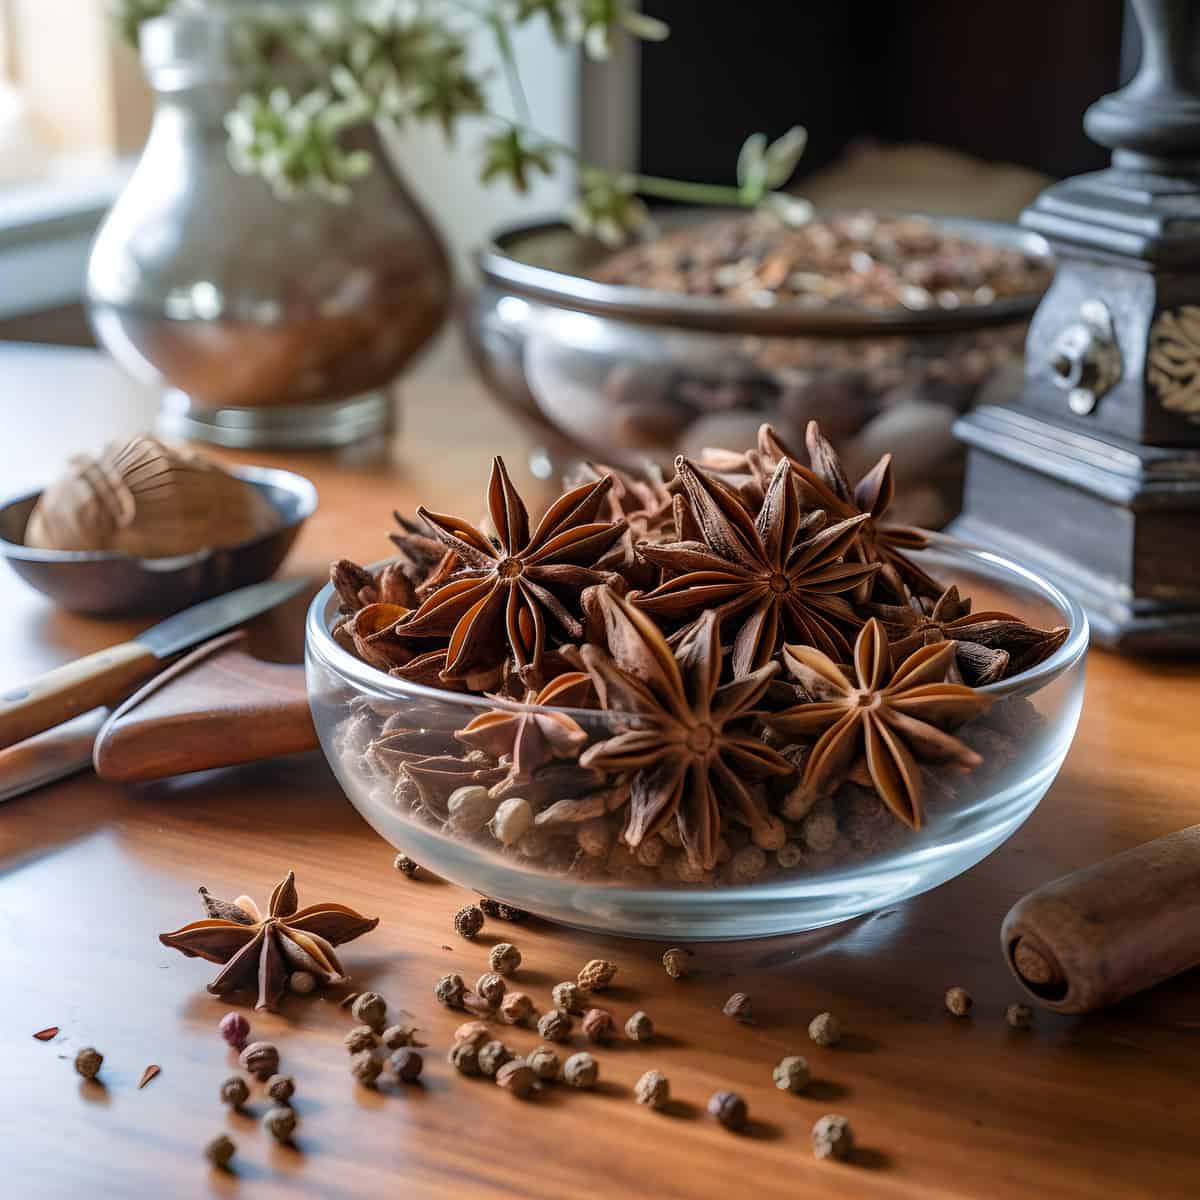 Anise on a kitchen counter